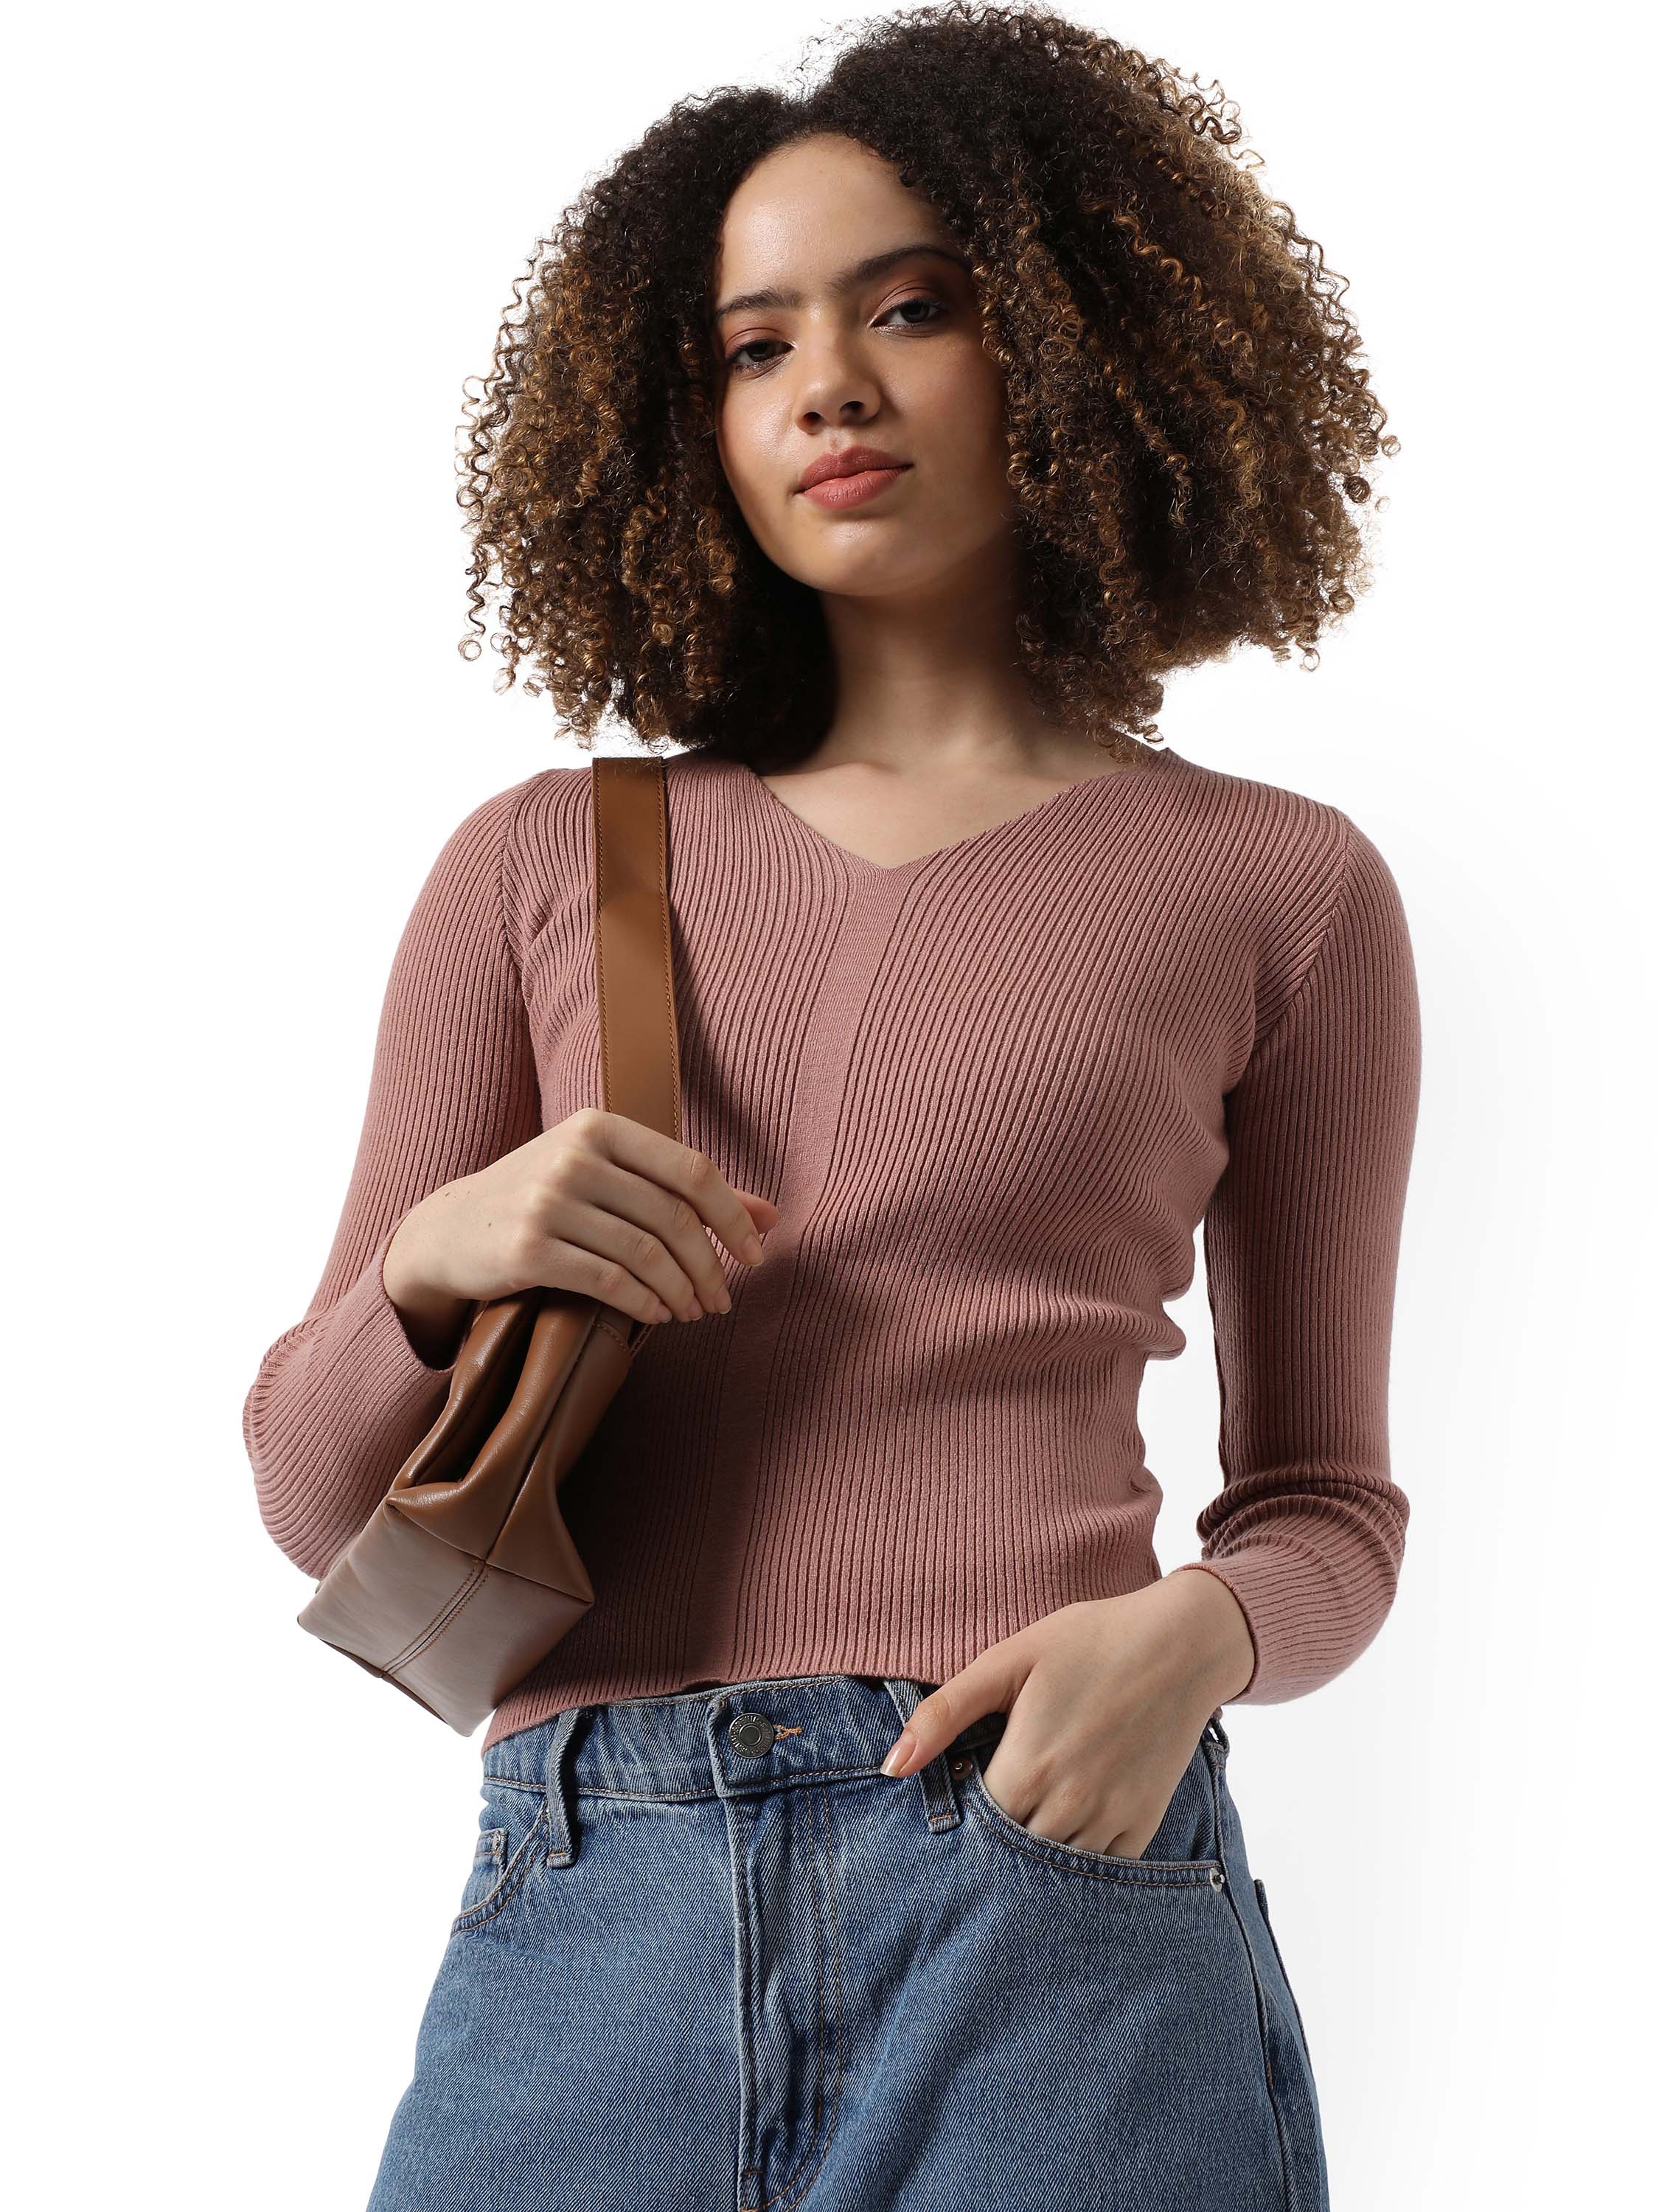 Solid Casual Winter Sweater For Women